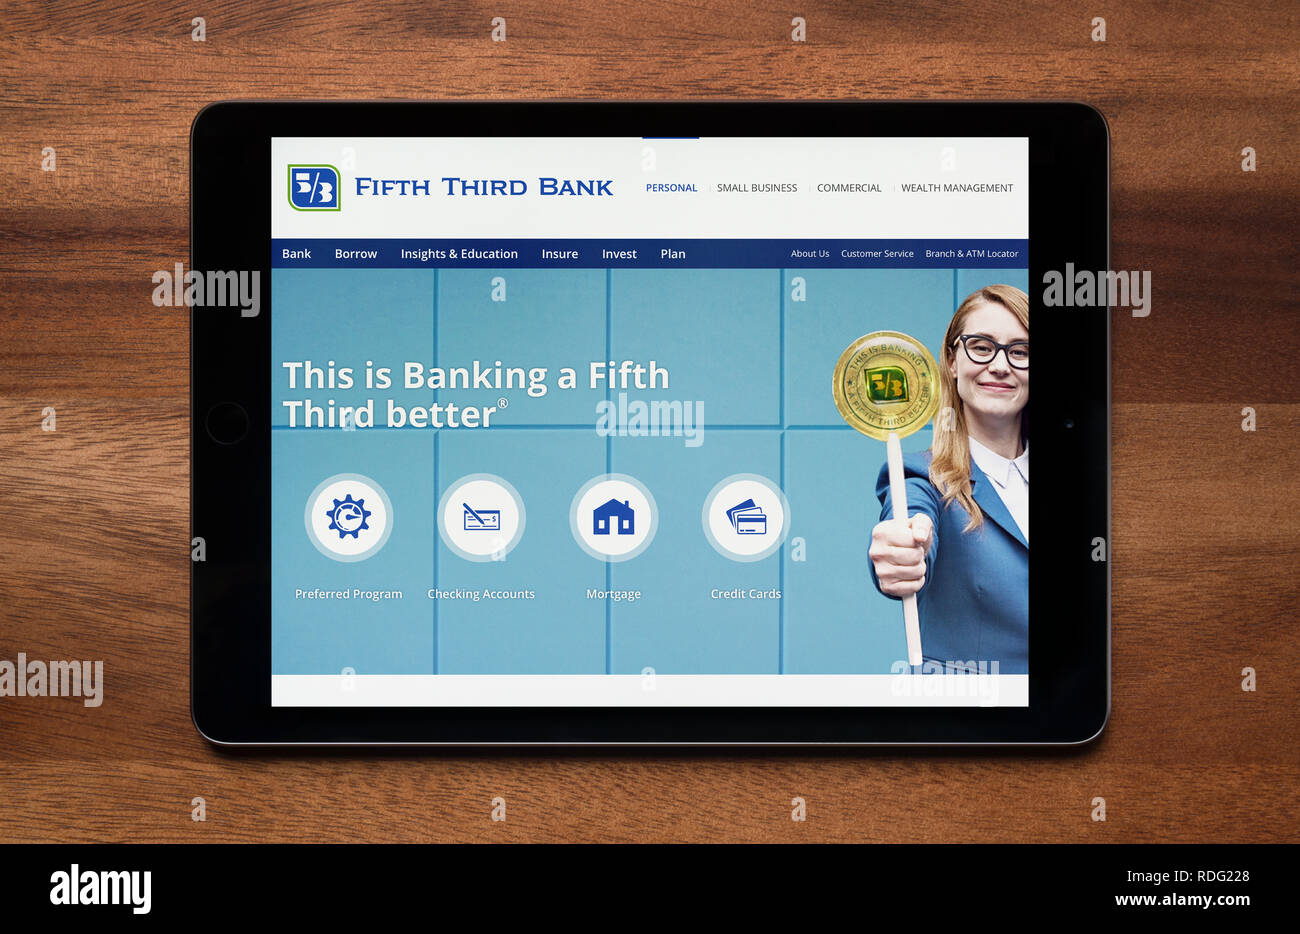 The website of Fifth Third bank is seen on an iPad tablet, which is resting on a wooden table (Editorial use only). Stock Photo